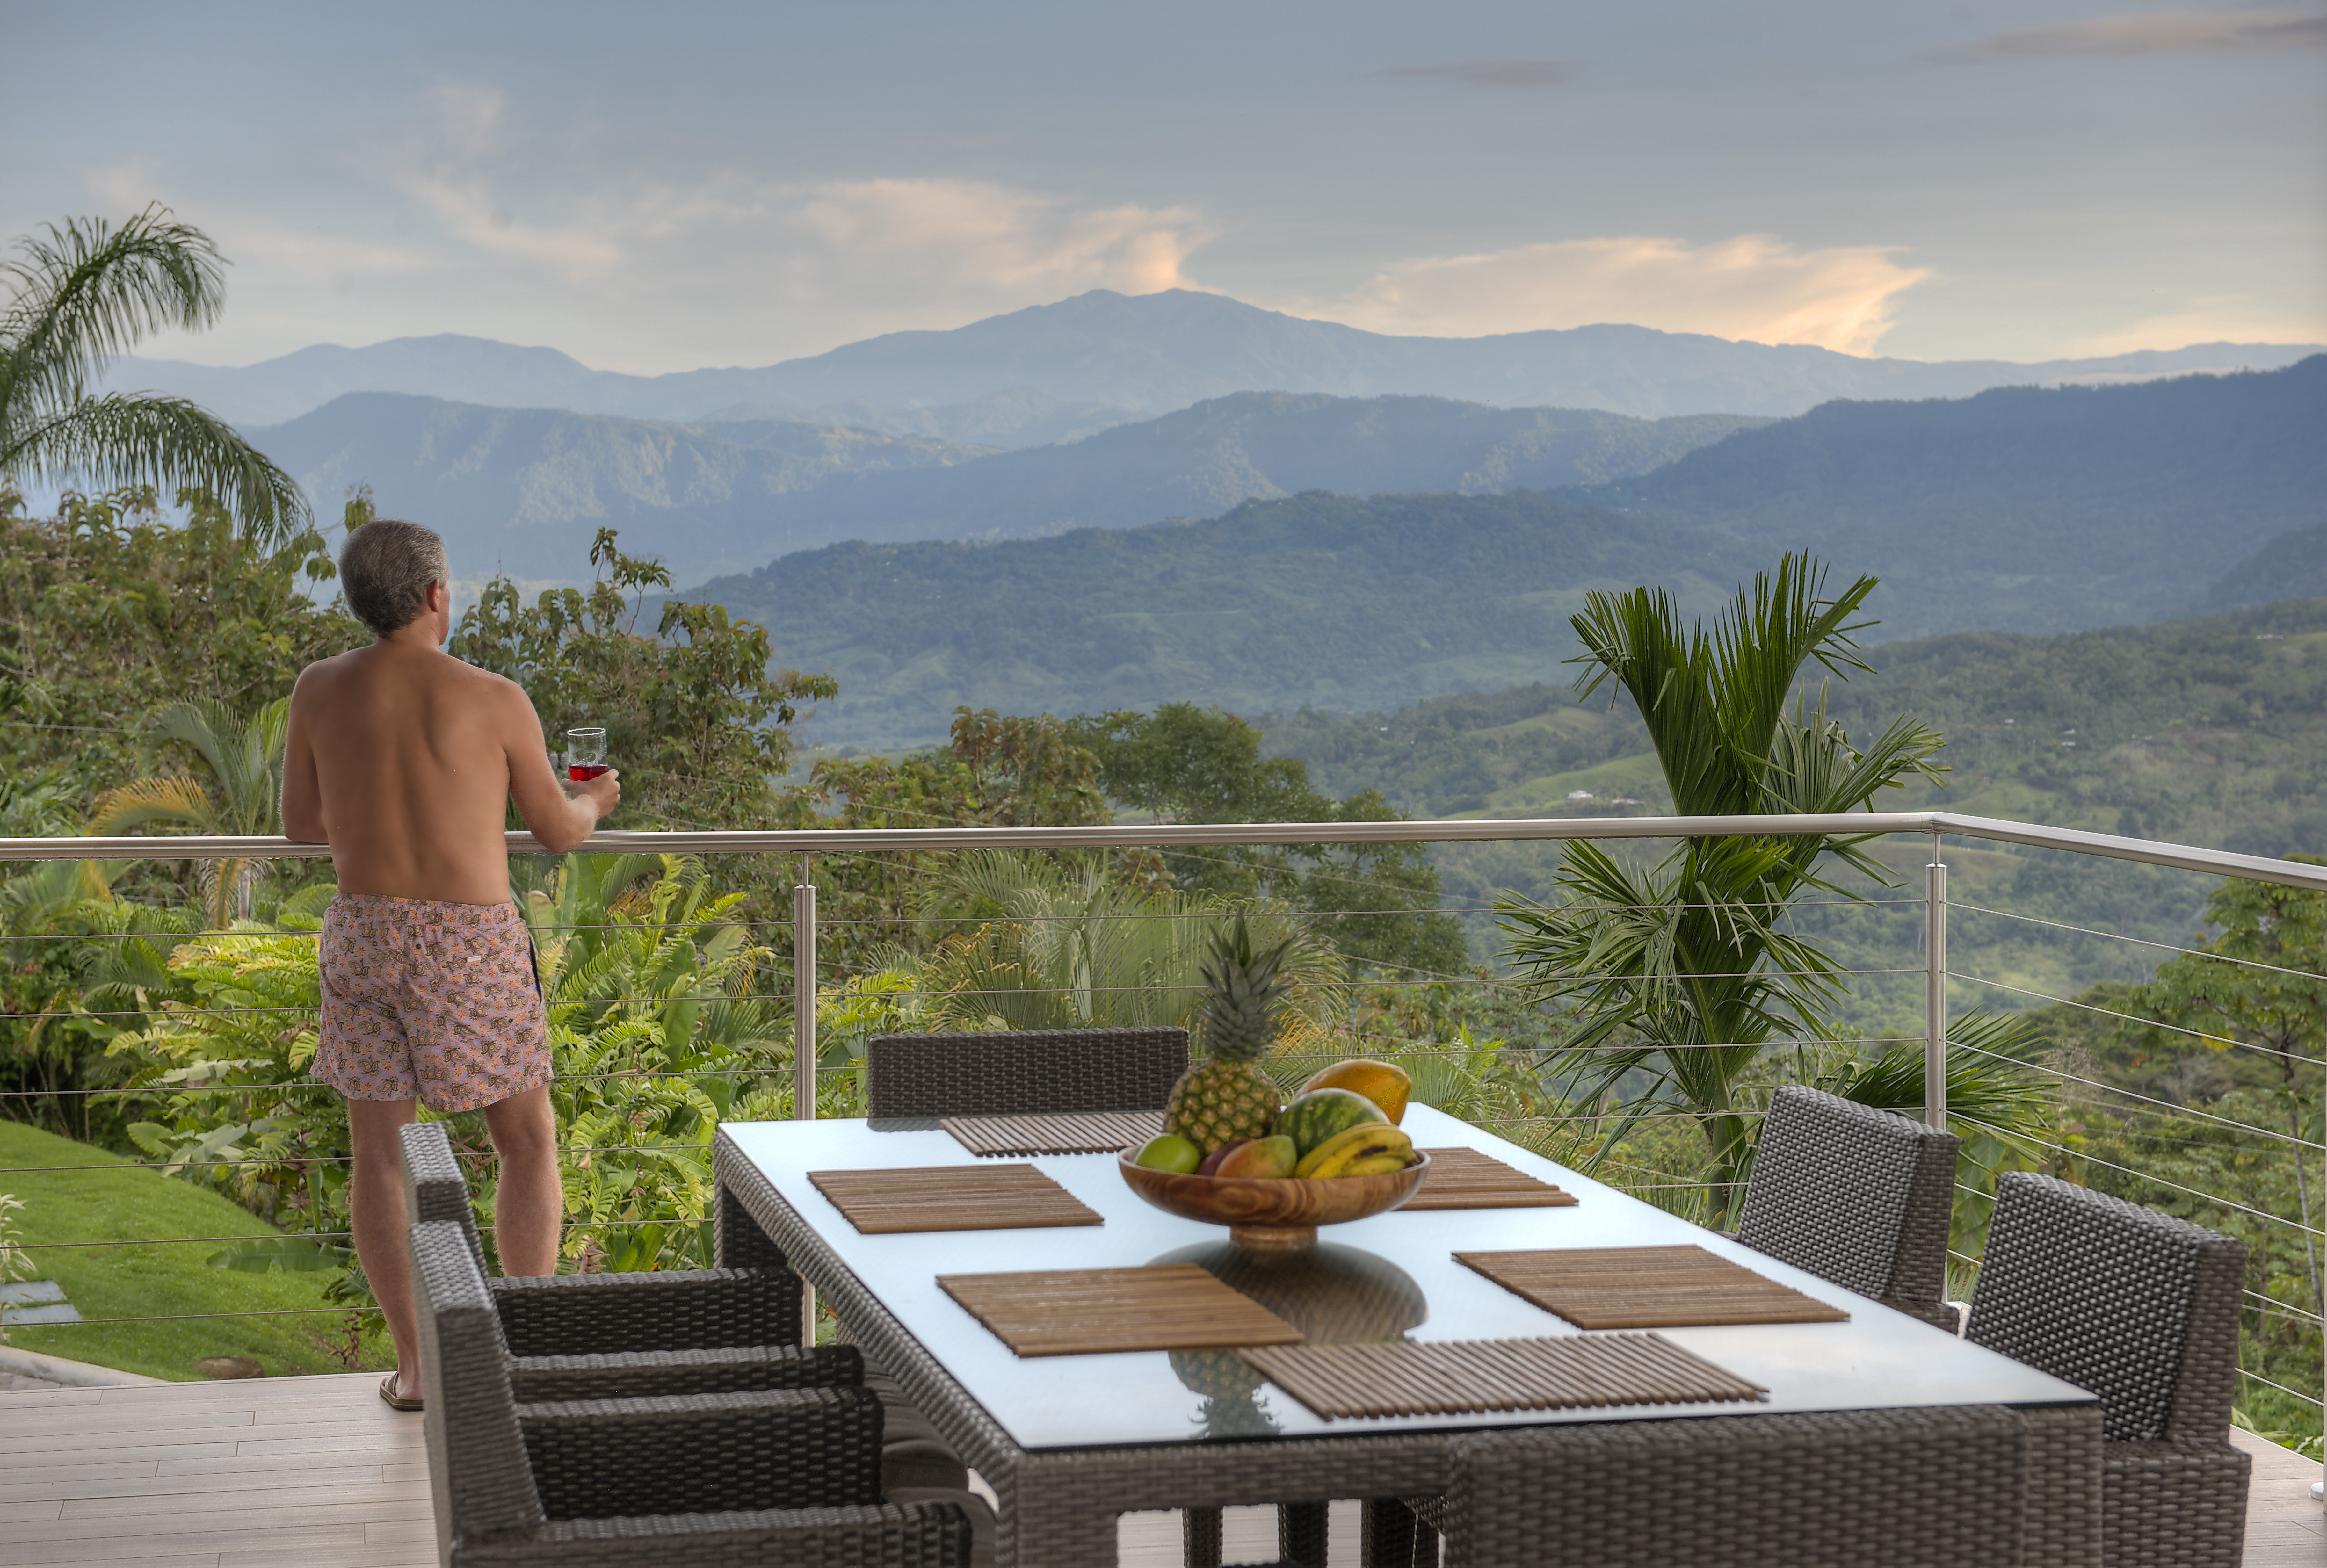 dulce pacifico homes forest views costa rica real estate for sale